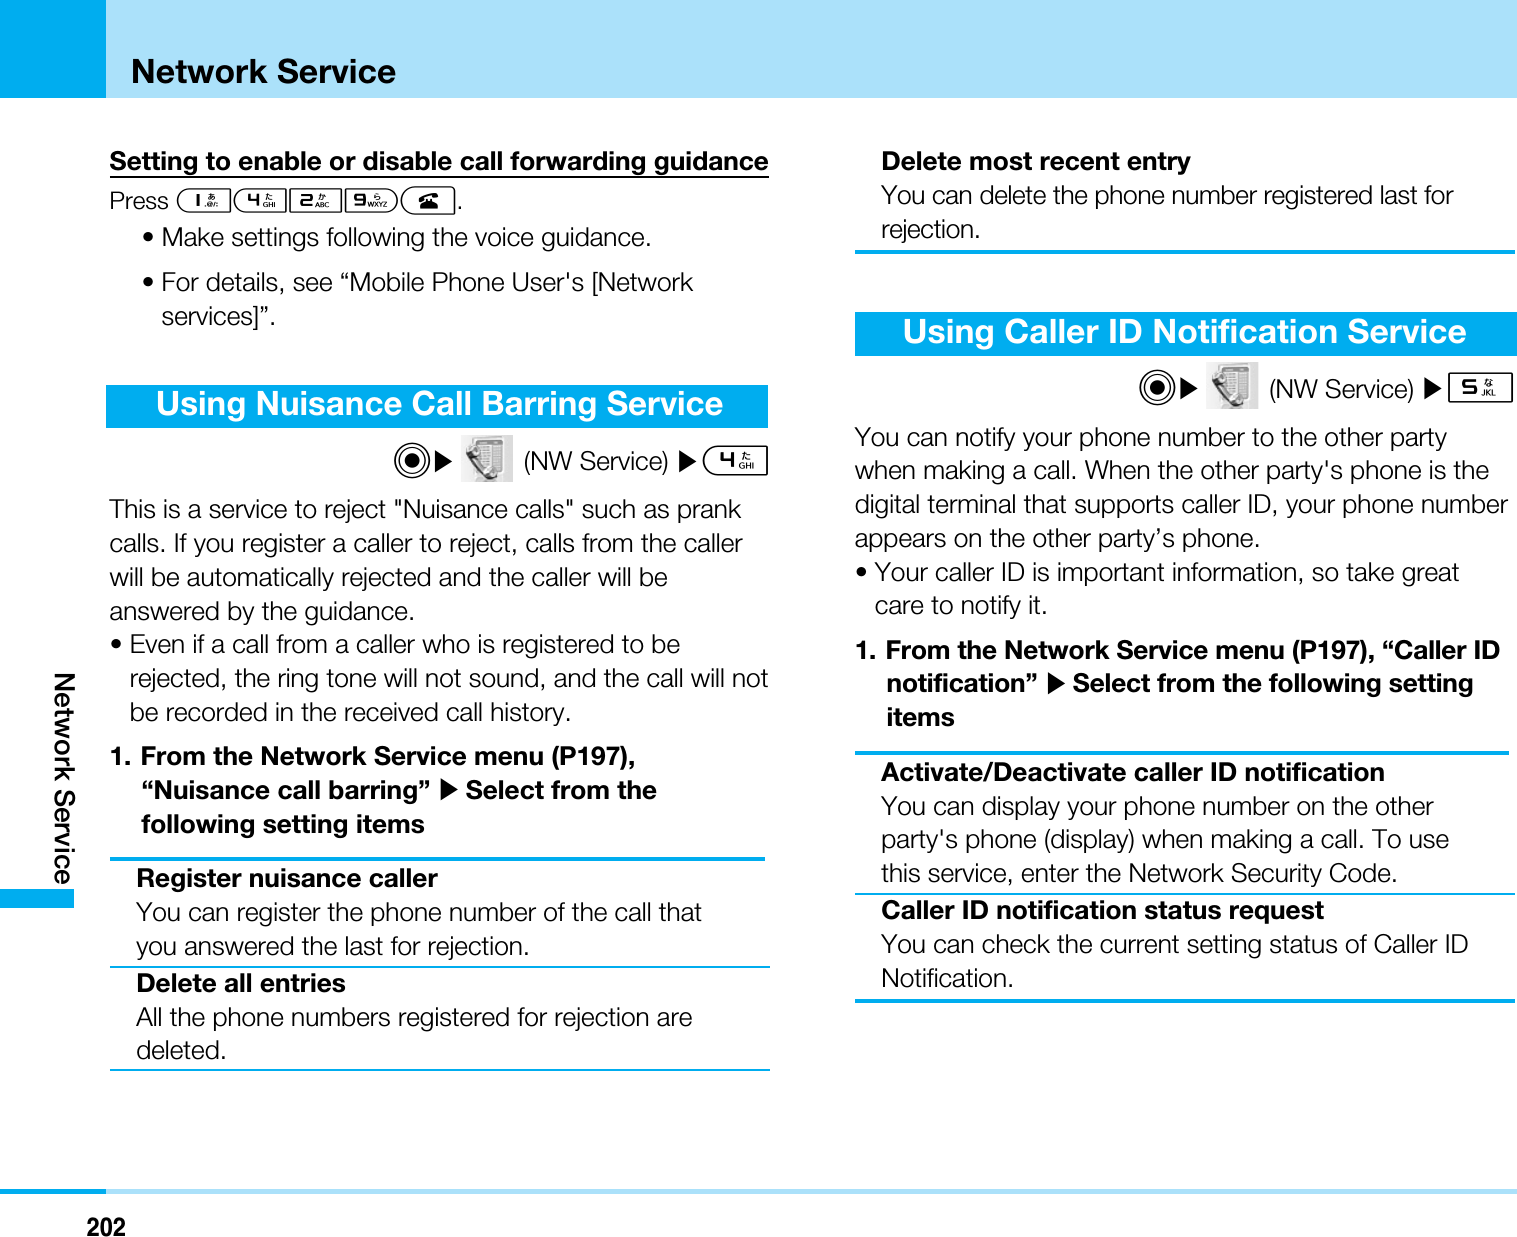 202Network ServiceNetwork ServiceSetting to enable or disable call forwarding guidancePress 1429A.• Make settings following the voice guidance.• For details, see “Mobile Phone User&apos;s [Networkservices]”.Using Nuisance Call Barring ServiceC](NW Service) ]4This is a service to reject &quot;Nuisance calls&quot; such as prankcalls. If you register a caller to reject, calls from the callerwill be automatically rejected and the caller will beanswered by the guidance. • Even if a call from a caller who is registered to berejected, the ring tone will not sound, and the call will notbe recorded in the received call history.1. From the Network Service menu (P197),“Nuisance call barring” ]Select from thefollowing setting itemsRegister nuisance callerYou can register the phone number of the call thatyou answered the last for rejection.Delete all entriesAll the phone numbers registered for rejection aredeleted.Delete most recent entryYou can delete the phone number registered last forrejection.Using Caller ID Notification ServiceC](NW Service) ]5You can notify your phone number to the other partywhen making a call. When the other party&apos;s phone is thedigital terminal that supports caller ID, your phone numberappears on the other party’s phone.• Your caller ID is important information, so take greatcare to notify it.1. From the Network Service menu (P197), “Caller IDnotification” ]Select from the following settingitemsActivate/Deactivate caller ID notificationYou can display your phone number on the otherparty&apos;s phone (display) when making a call. To usethis service, enter the Network Security Code.Caller ID notification status requestYou can check the current setting status of Caller IDNotification.